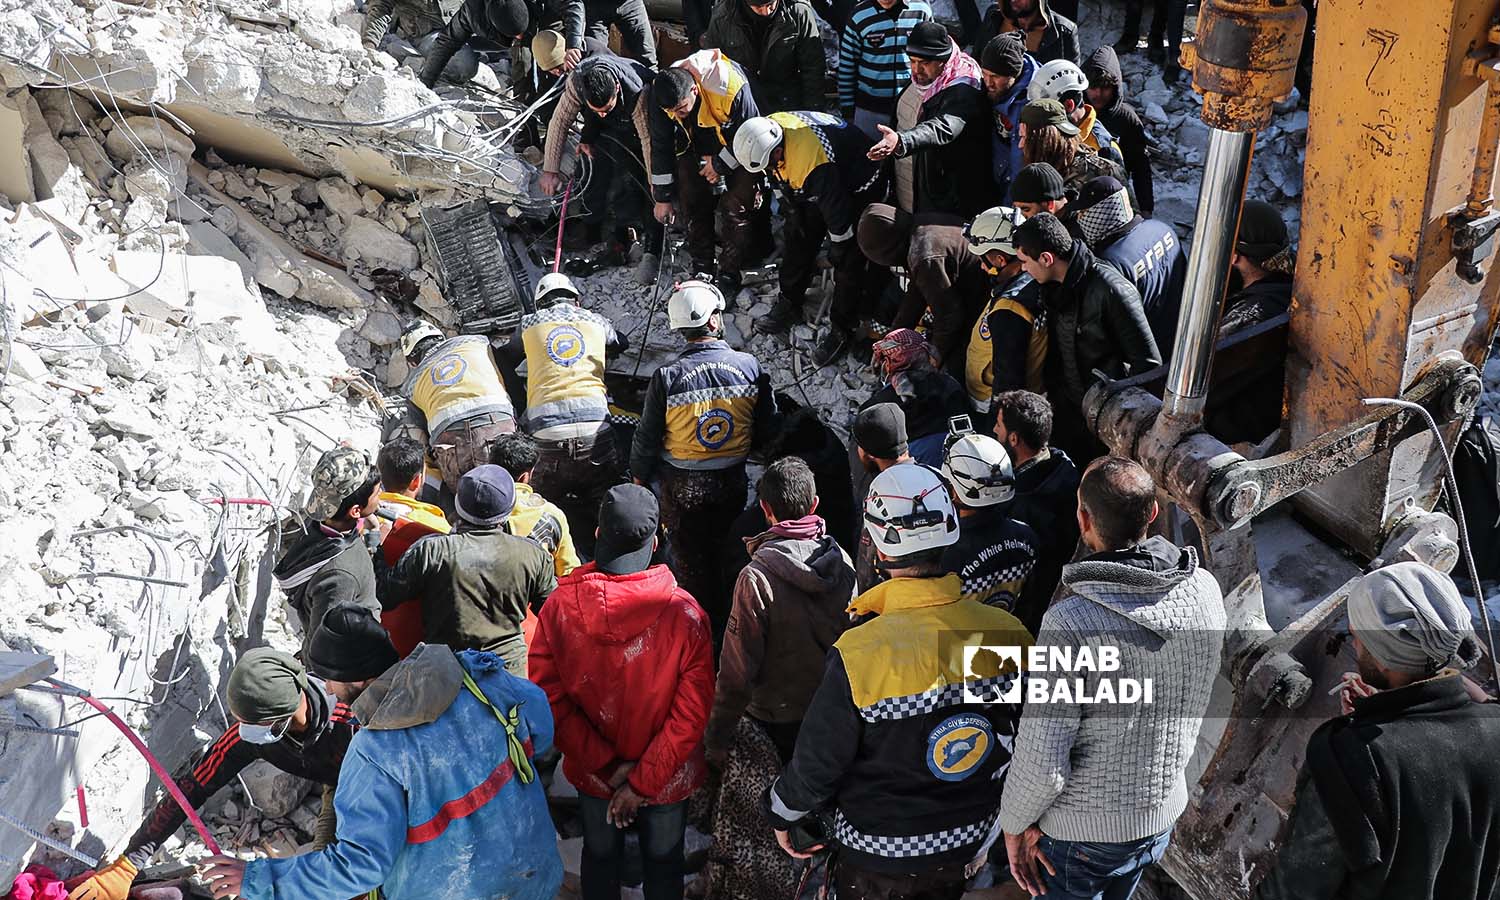 Volunteers and civilians in northwestern Syria, trying to rescue the injured and recover the victims from under the rubble in Salqin following the massive Feb-6th earthquake - February 7, 2023 (Enab Baladi/Mohammad Nasan Dabel)